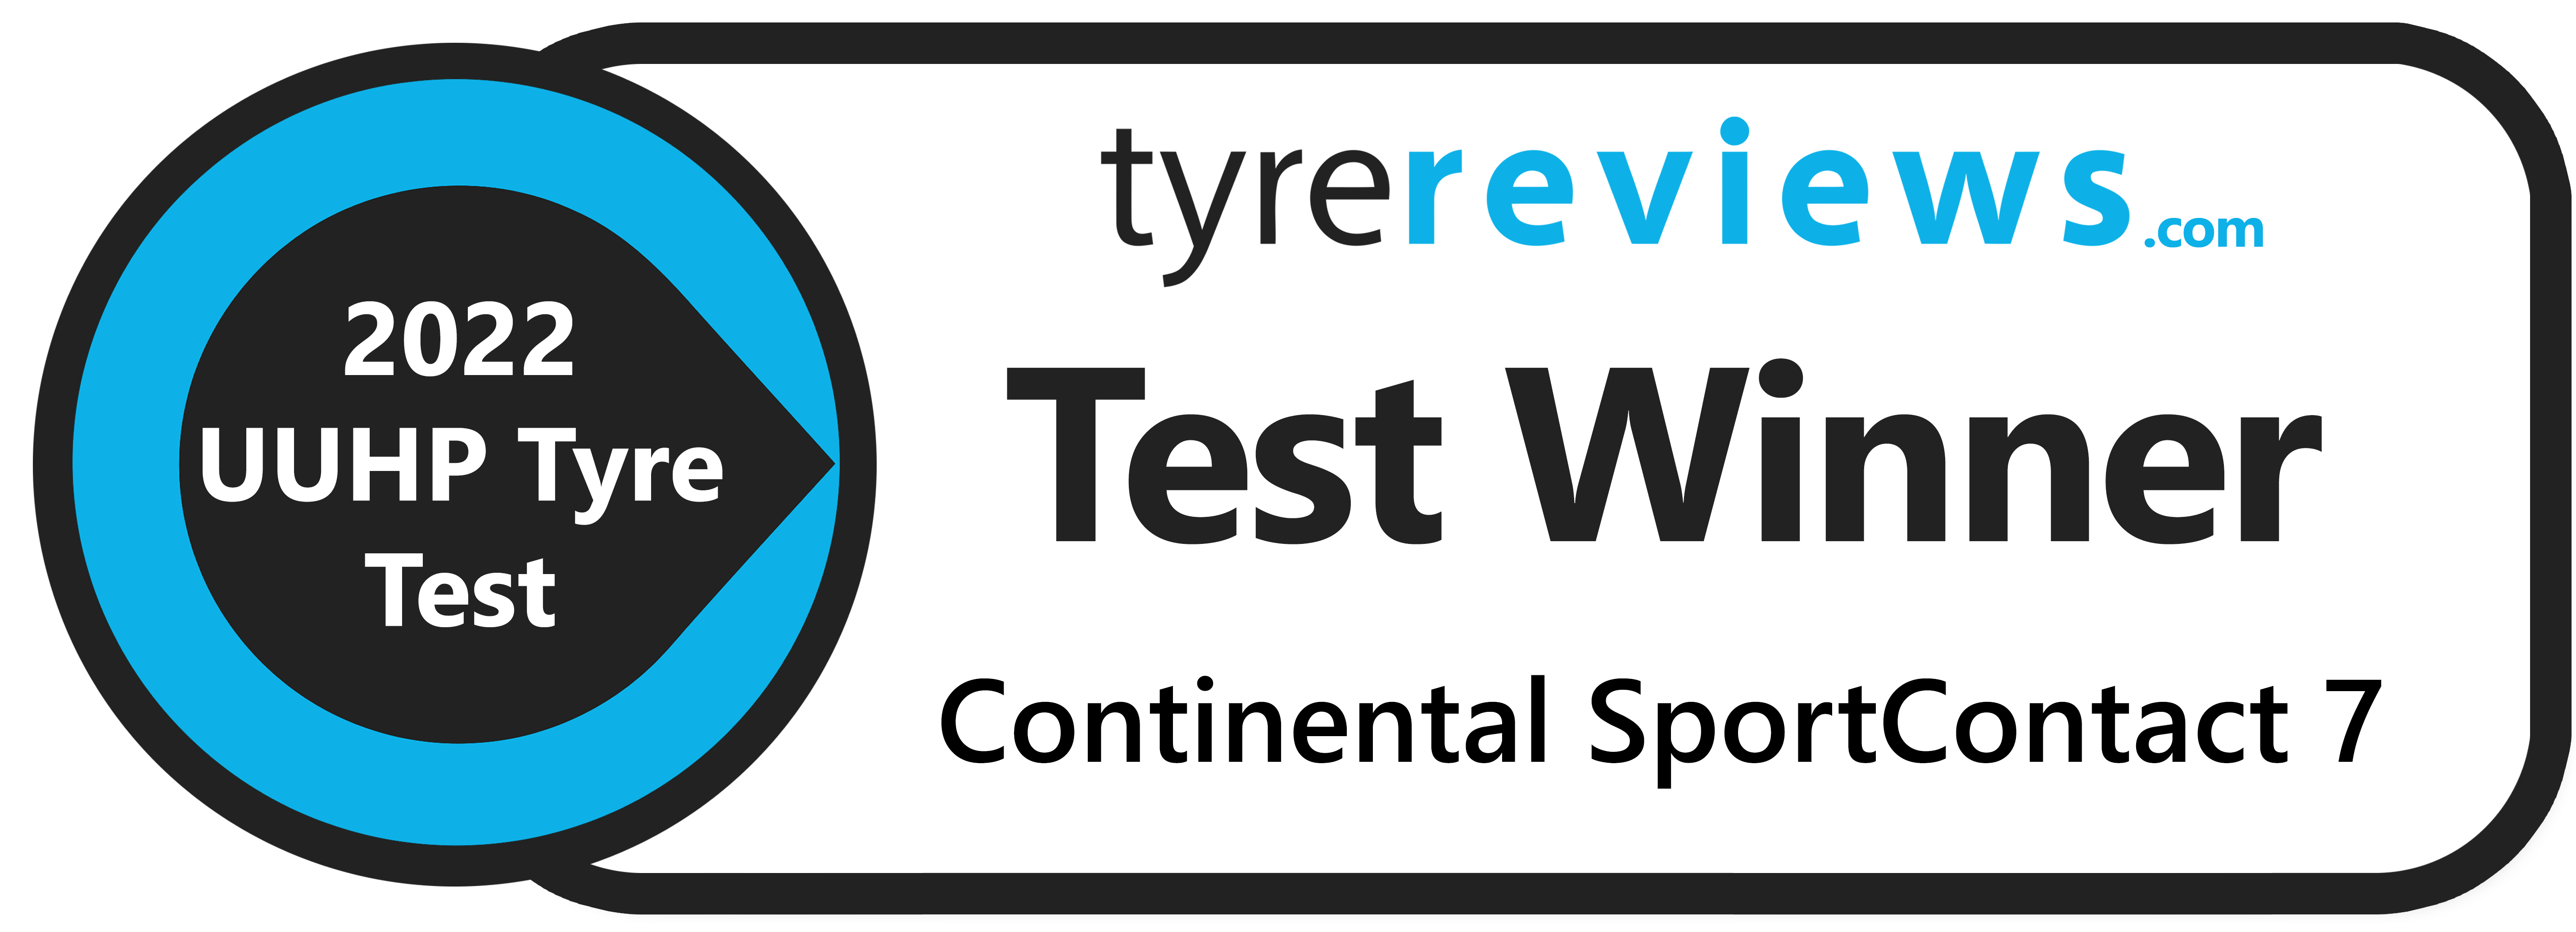 tyre reviews